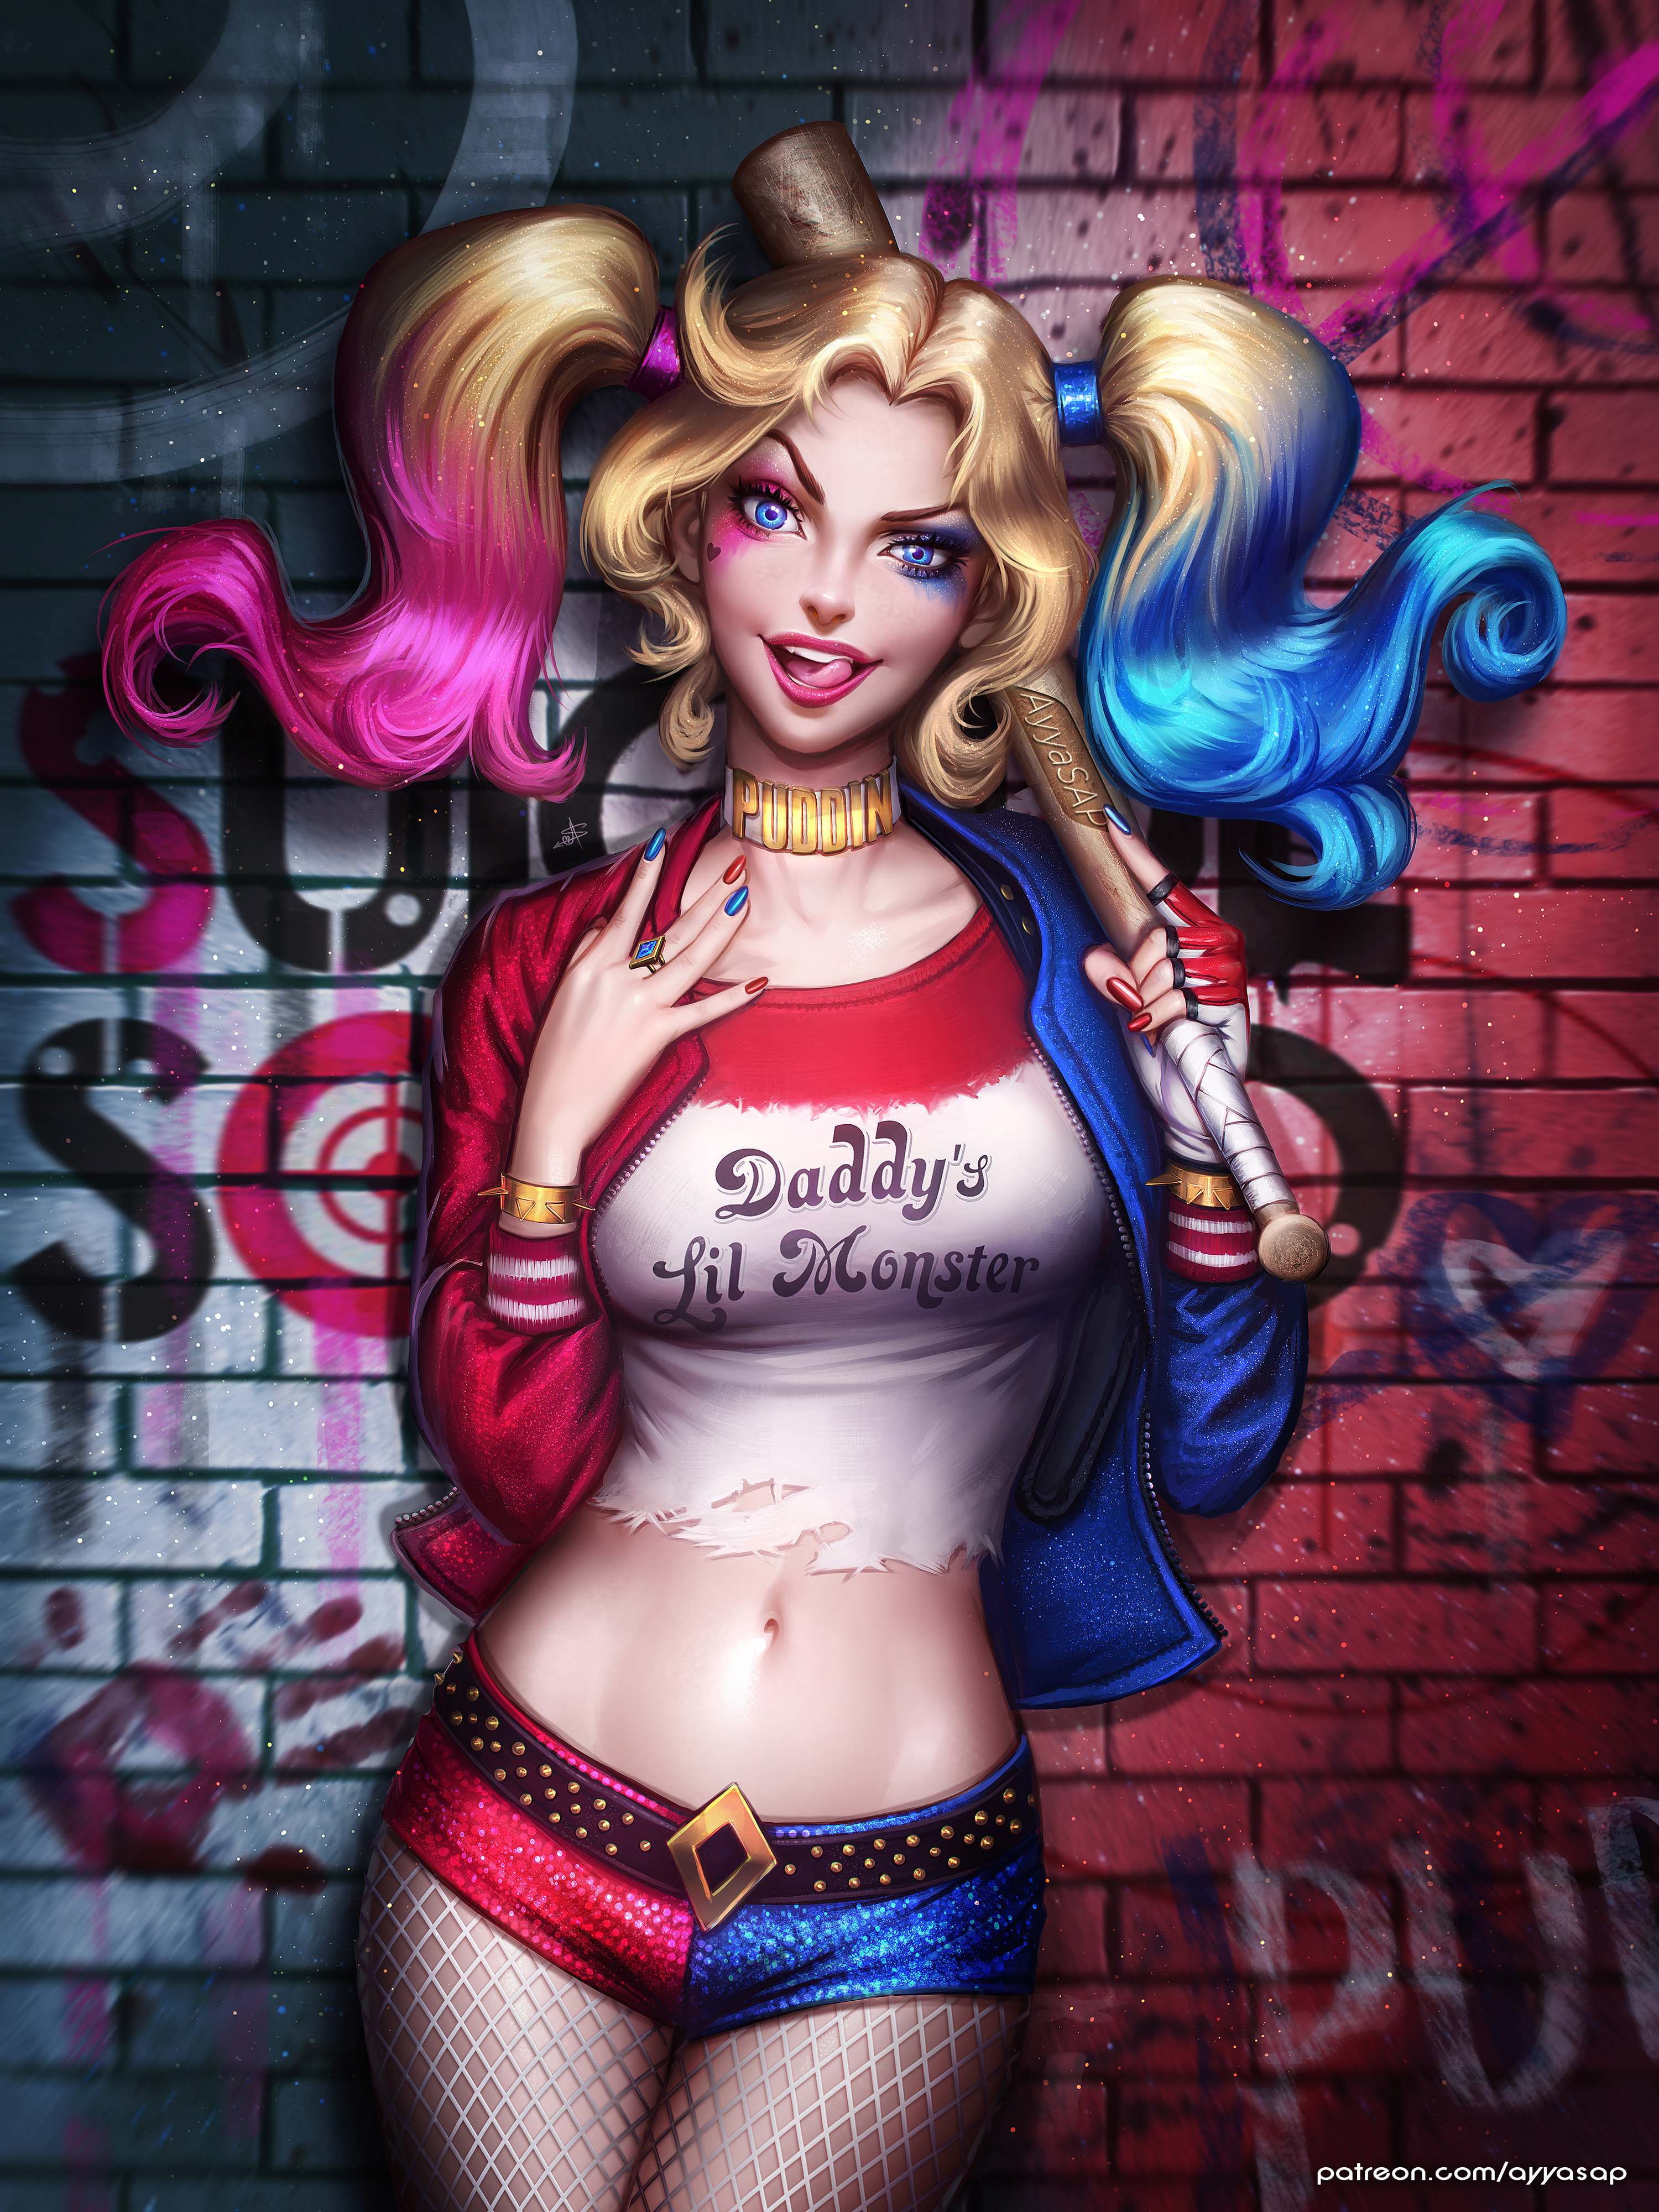 Harley Quinn Suicide Squad DC Comics Fictional Character Dyed Hair Pigtails Looking At Viewer Baseba 3000x4000